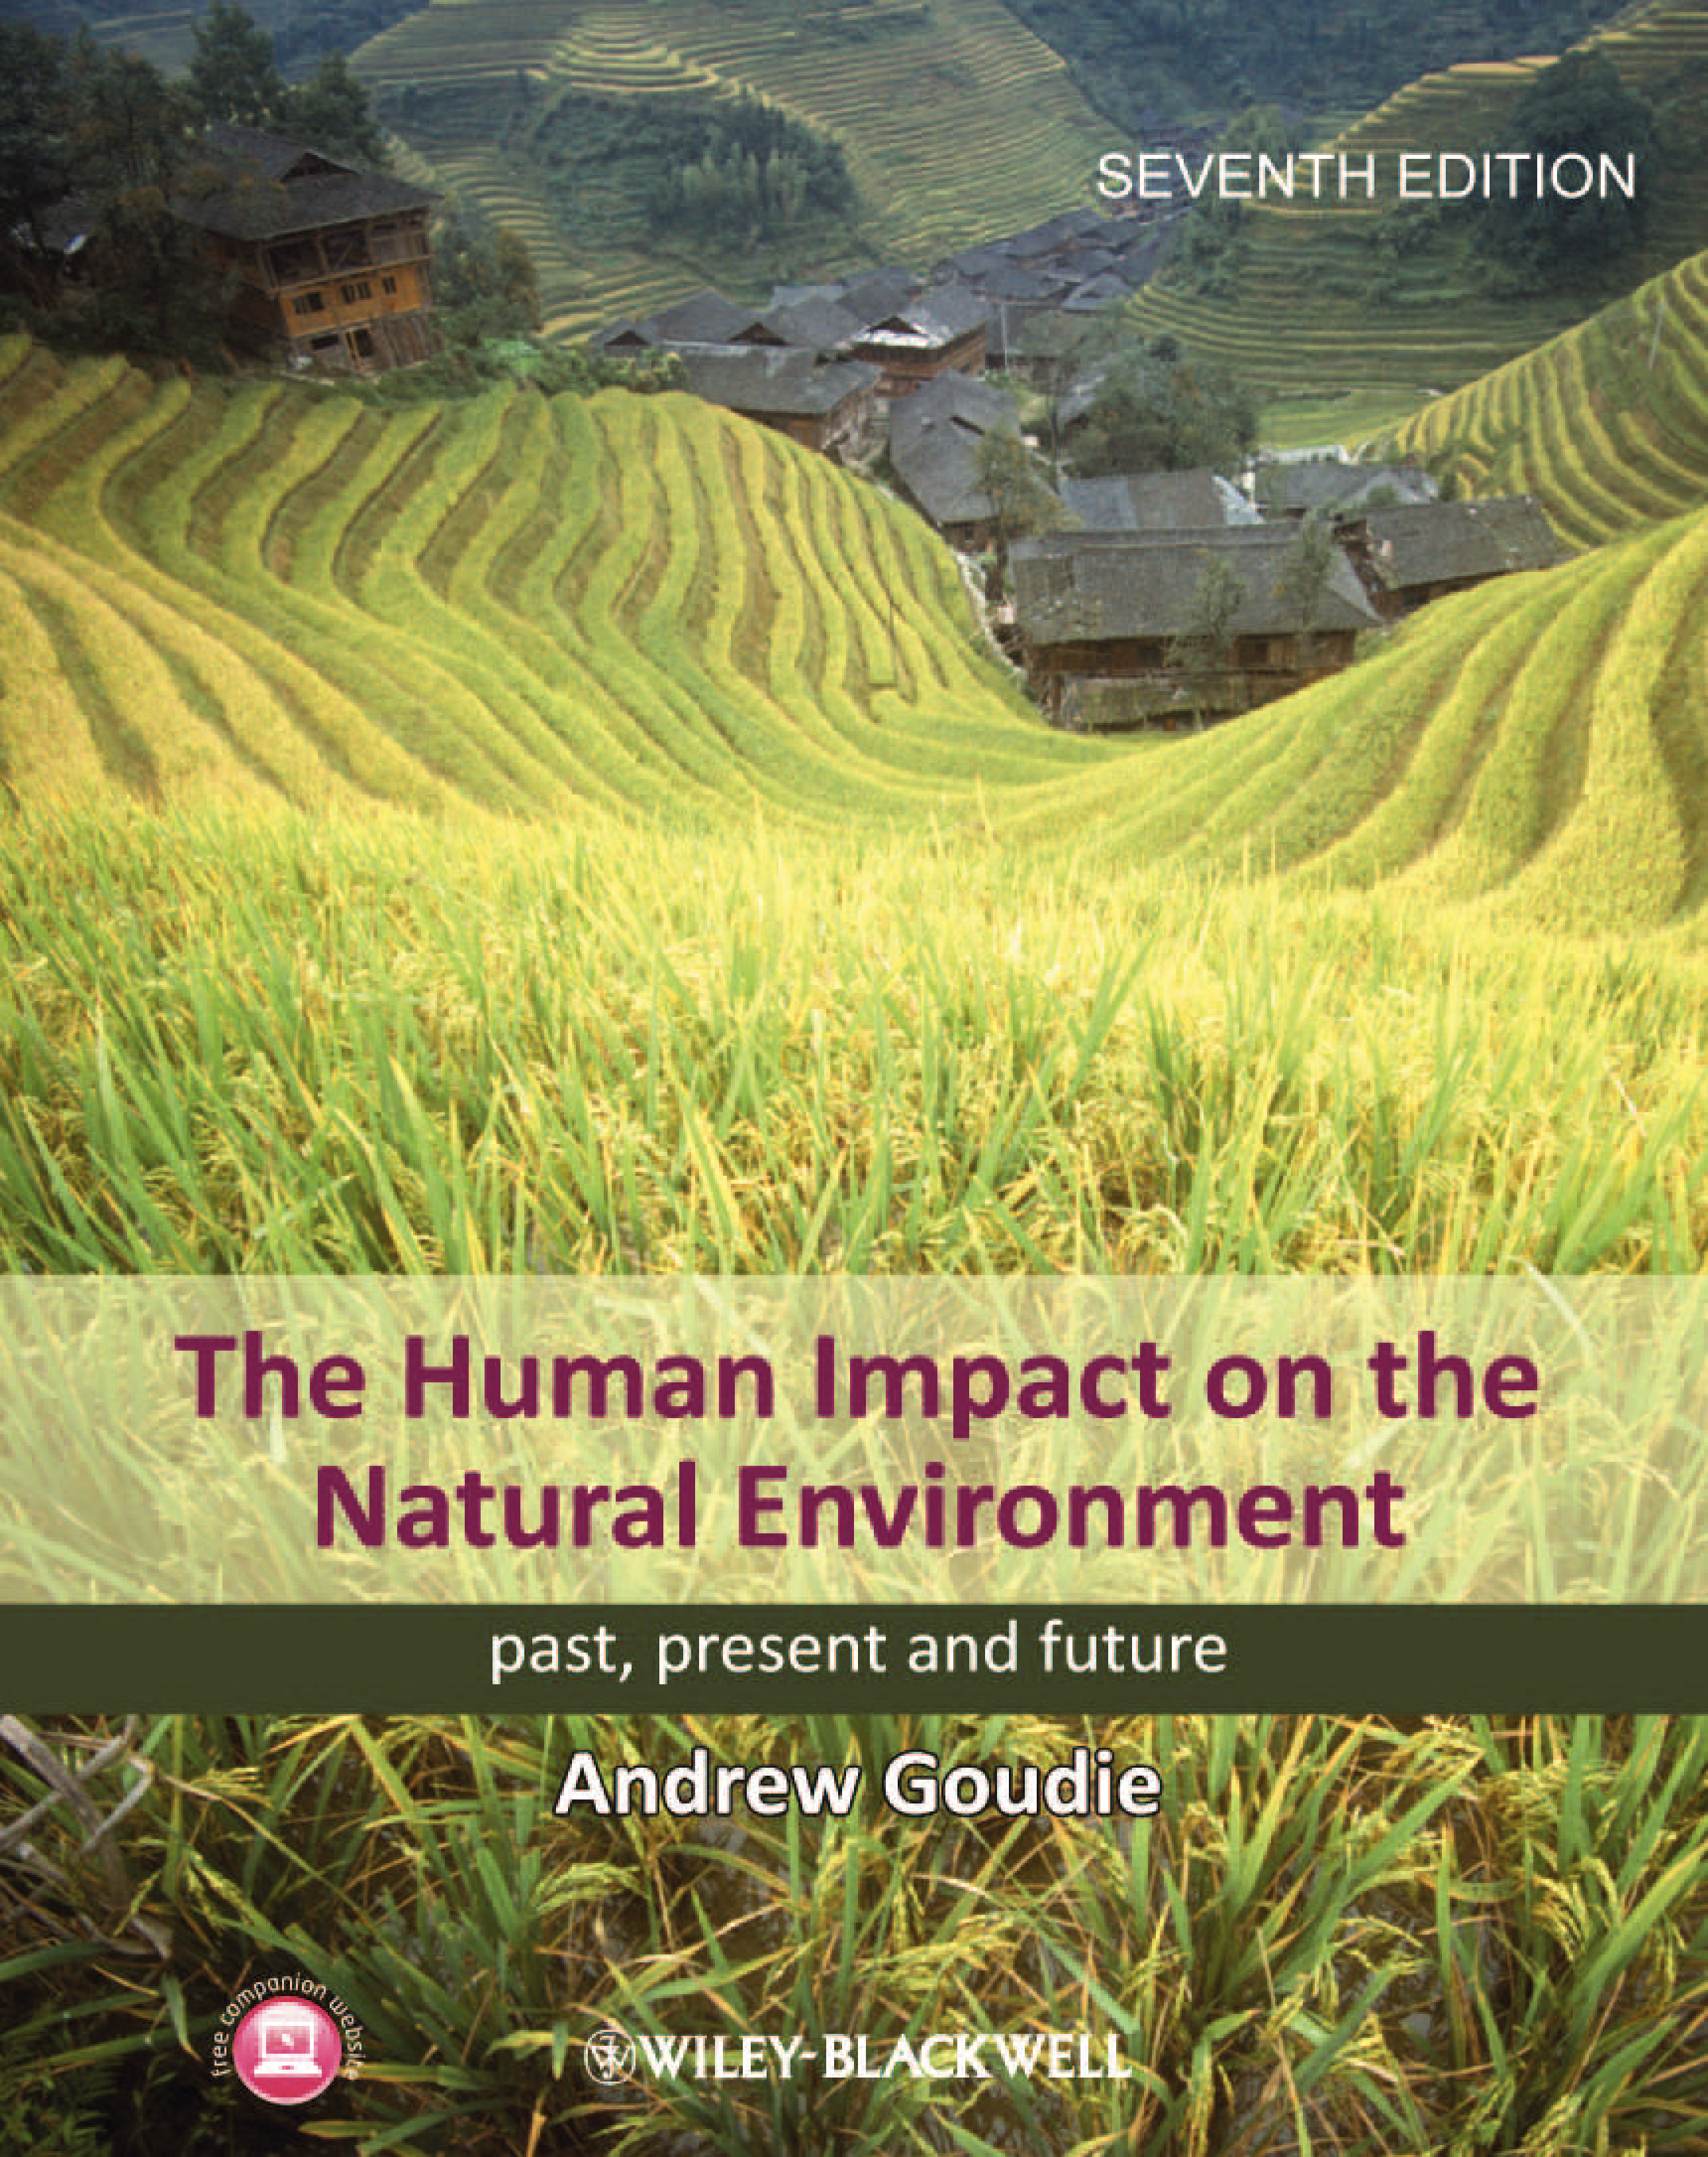 The human impact on the natural environment - past present, and future